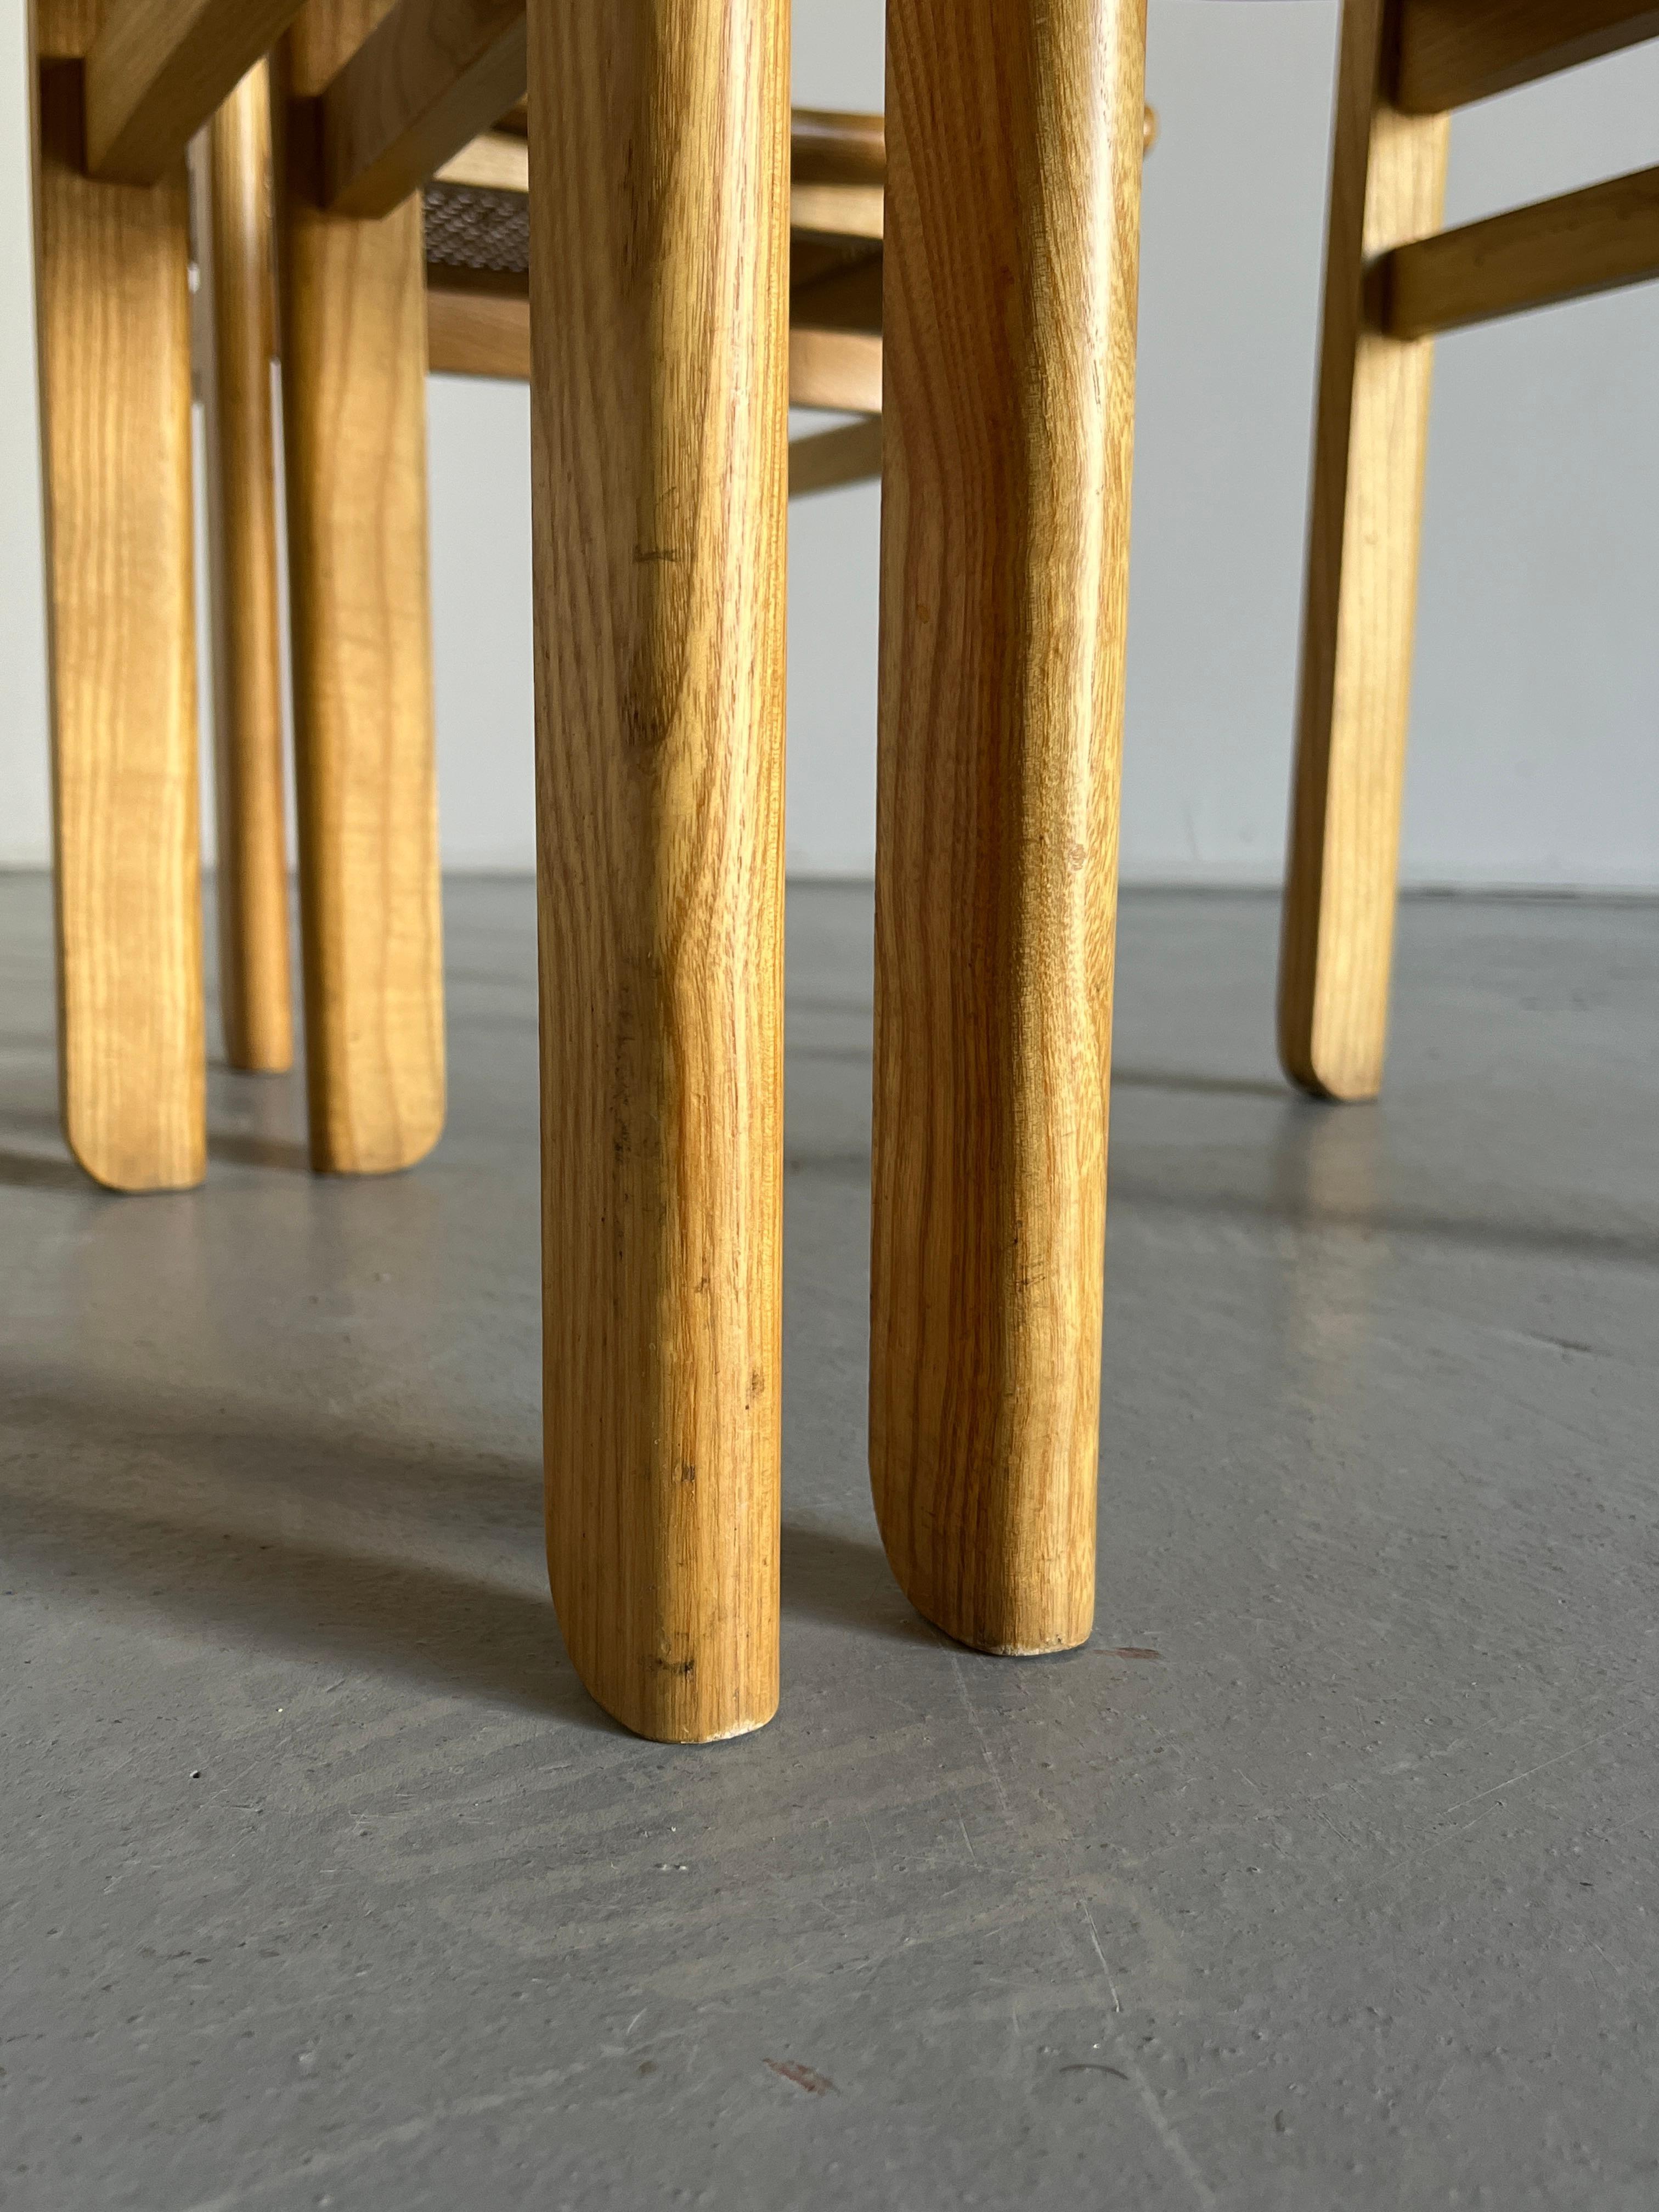 Set of 4 Mid-Century Modern Constructivist Wooden Dining Chairs in Beech, 1960s For Sale 5